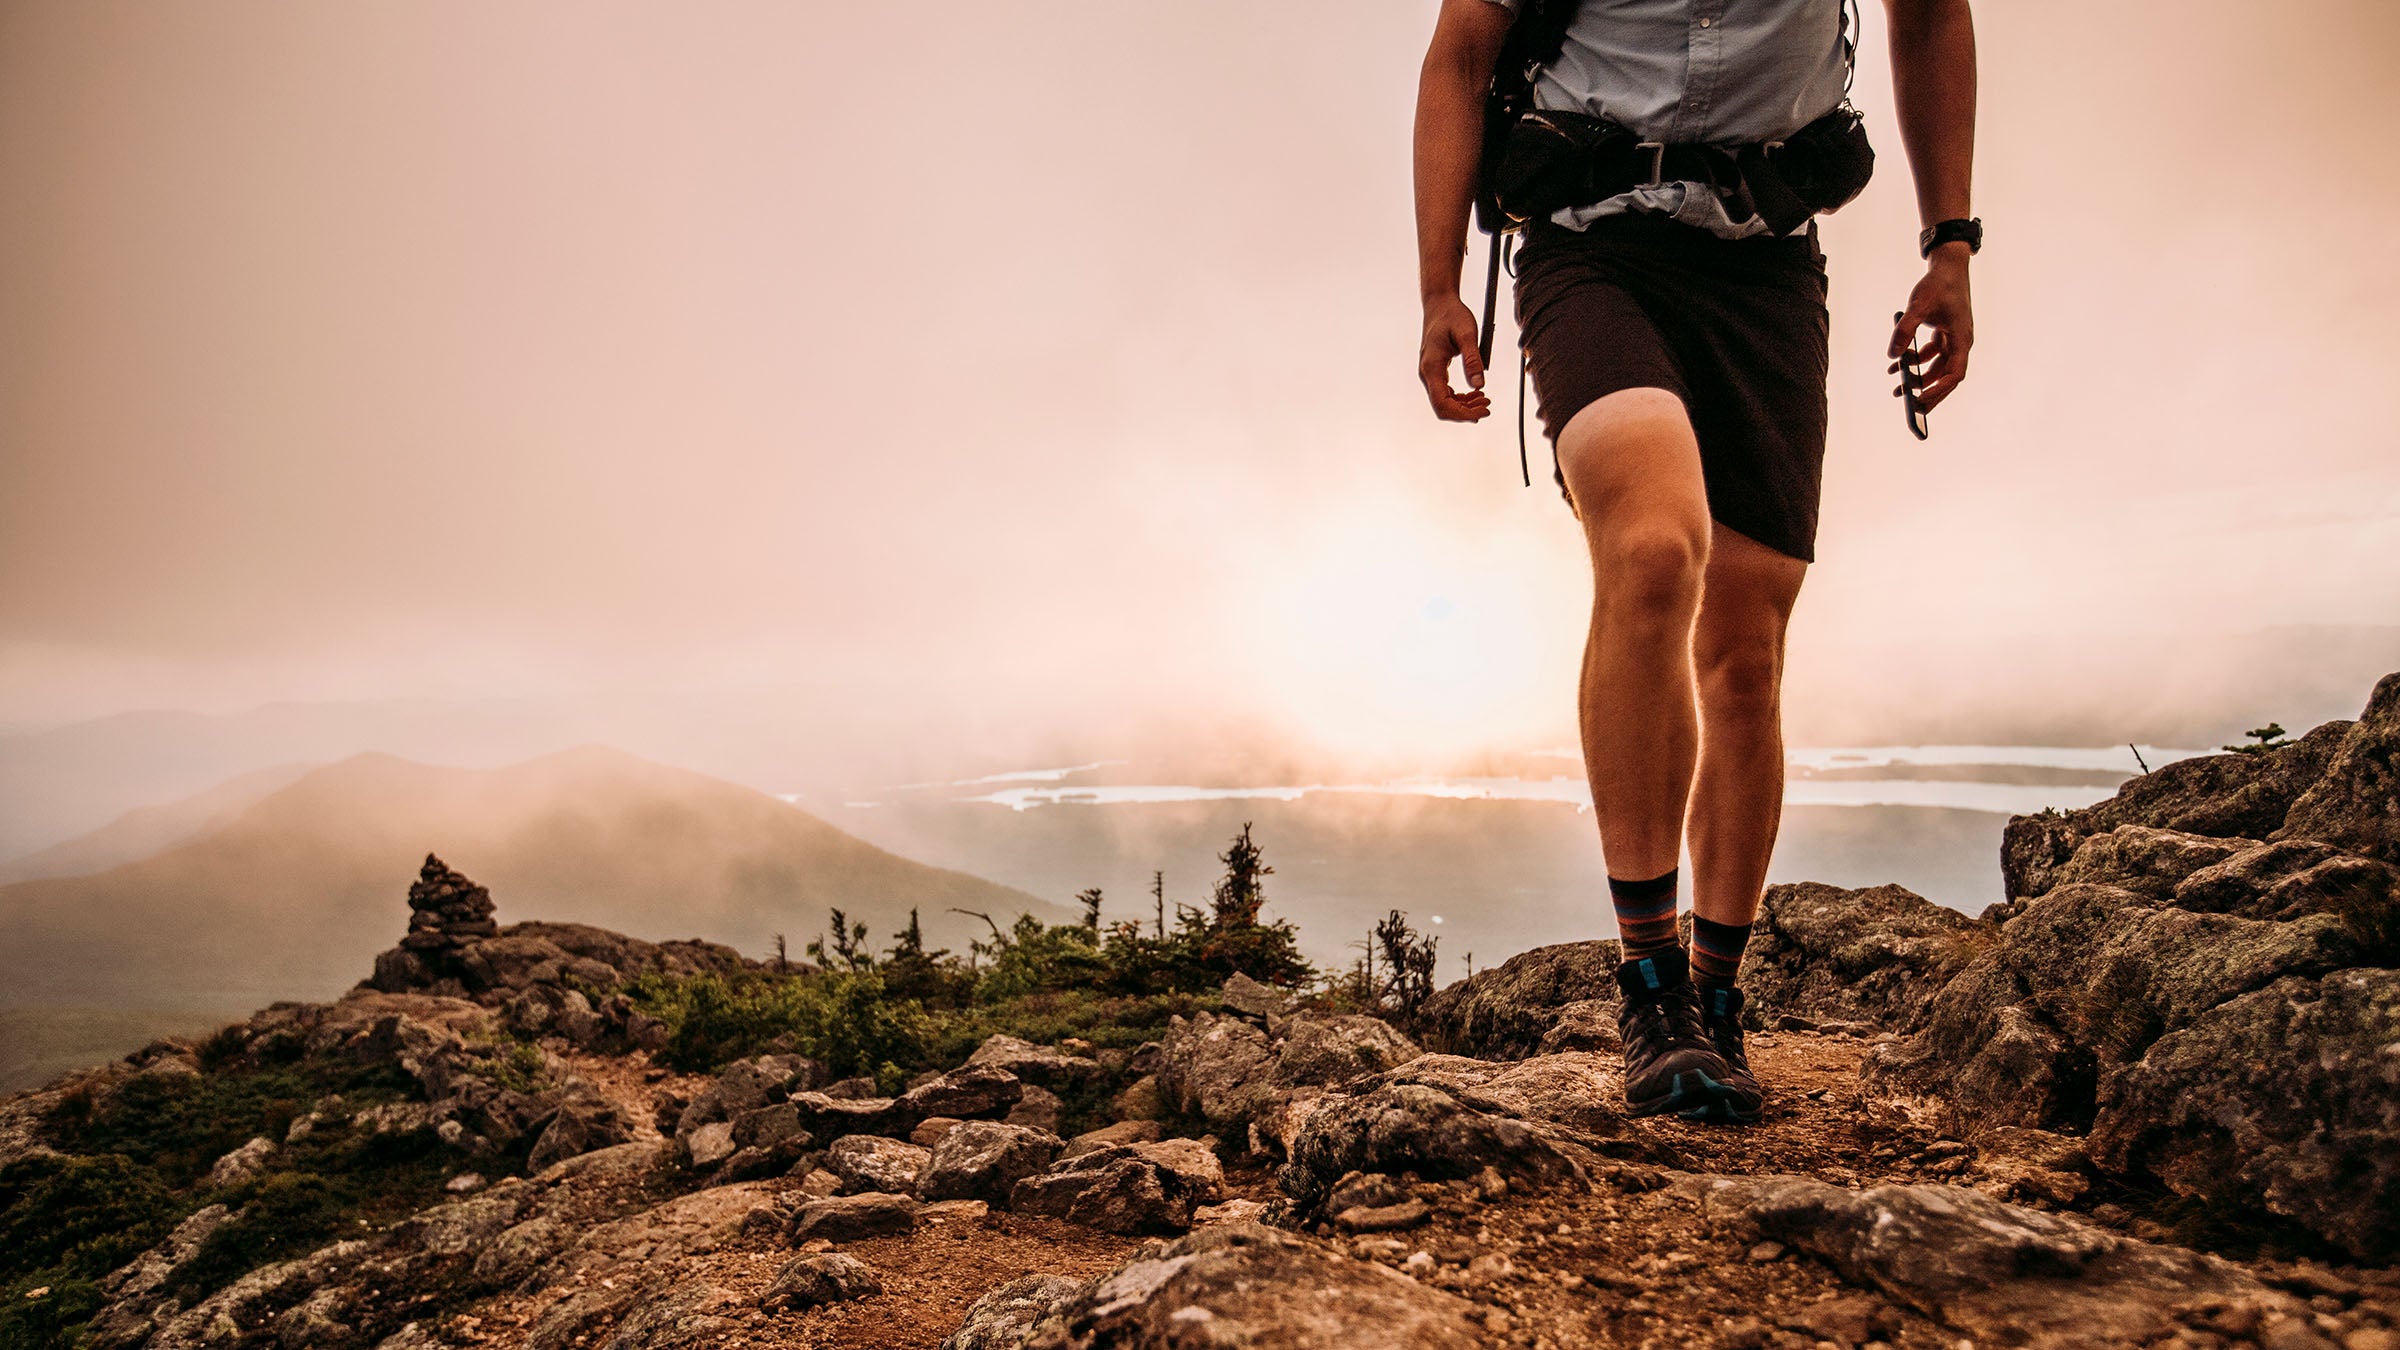 6 Ways Your Body Can Change From Hiking